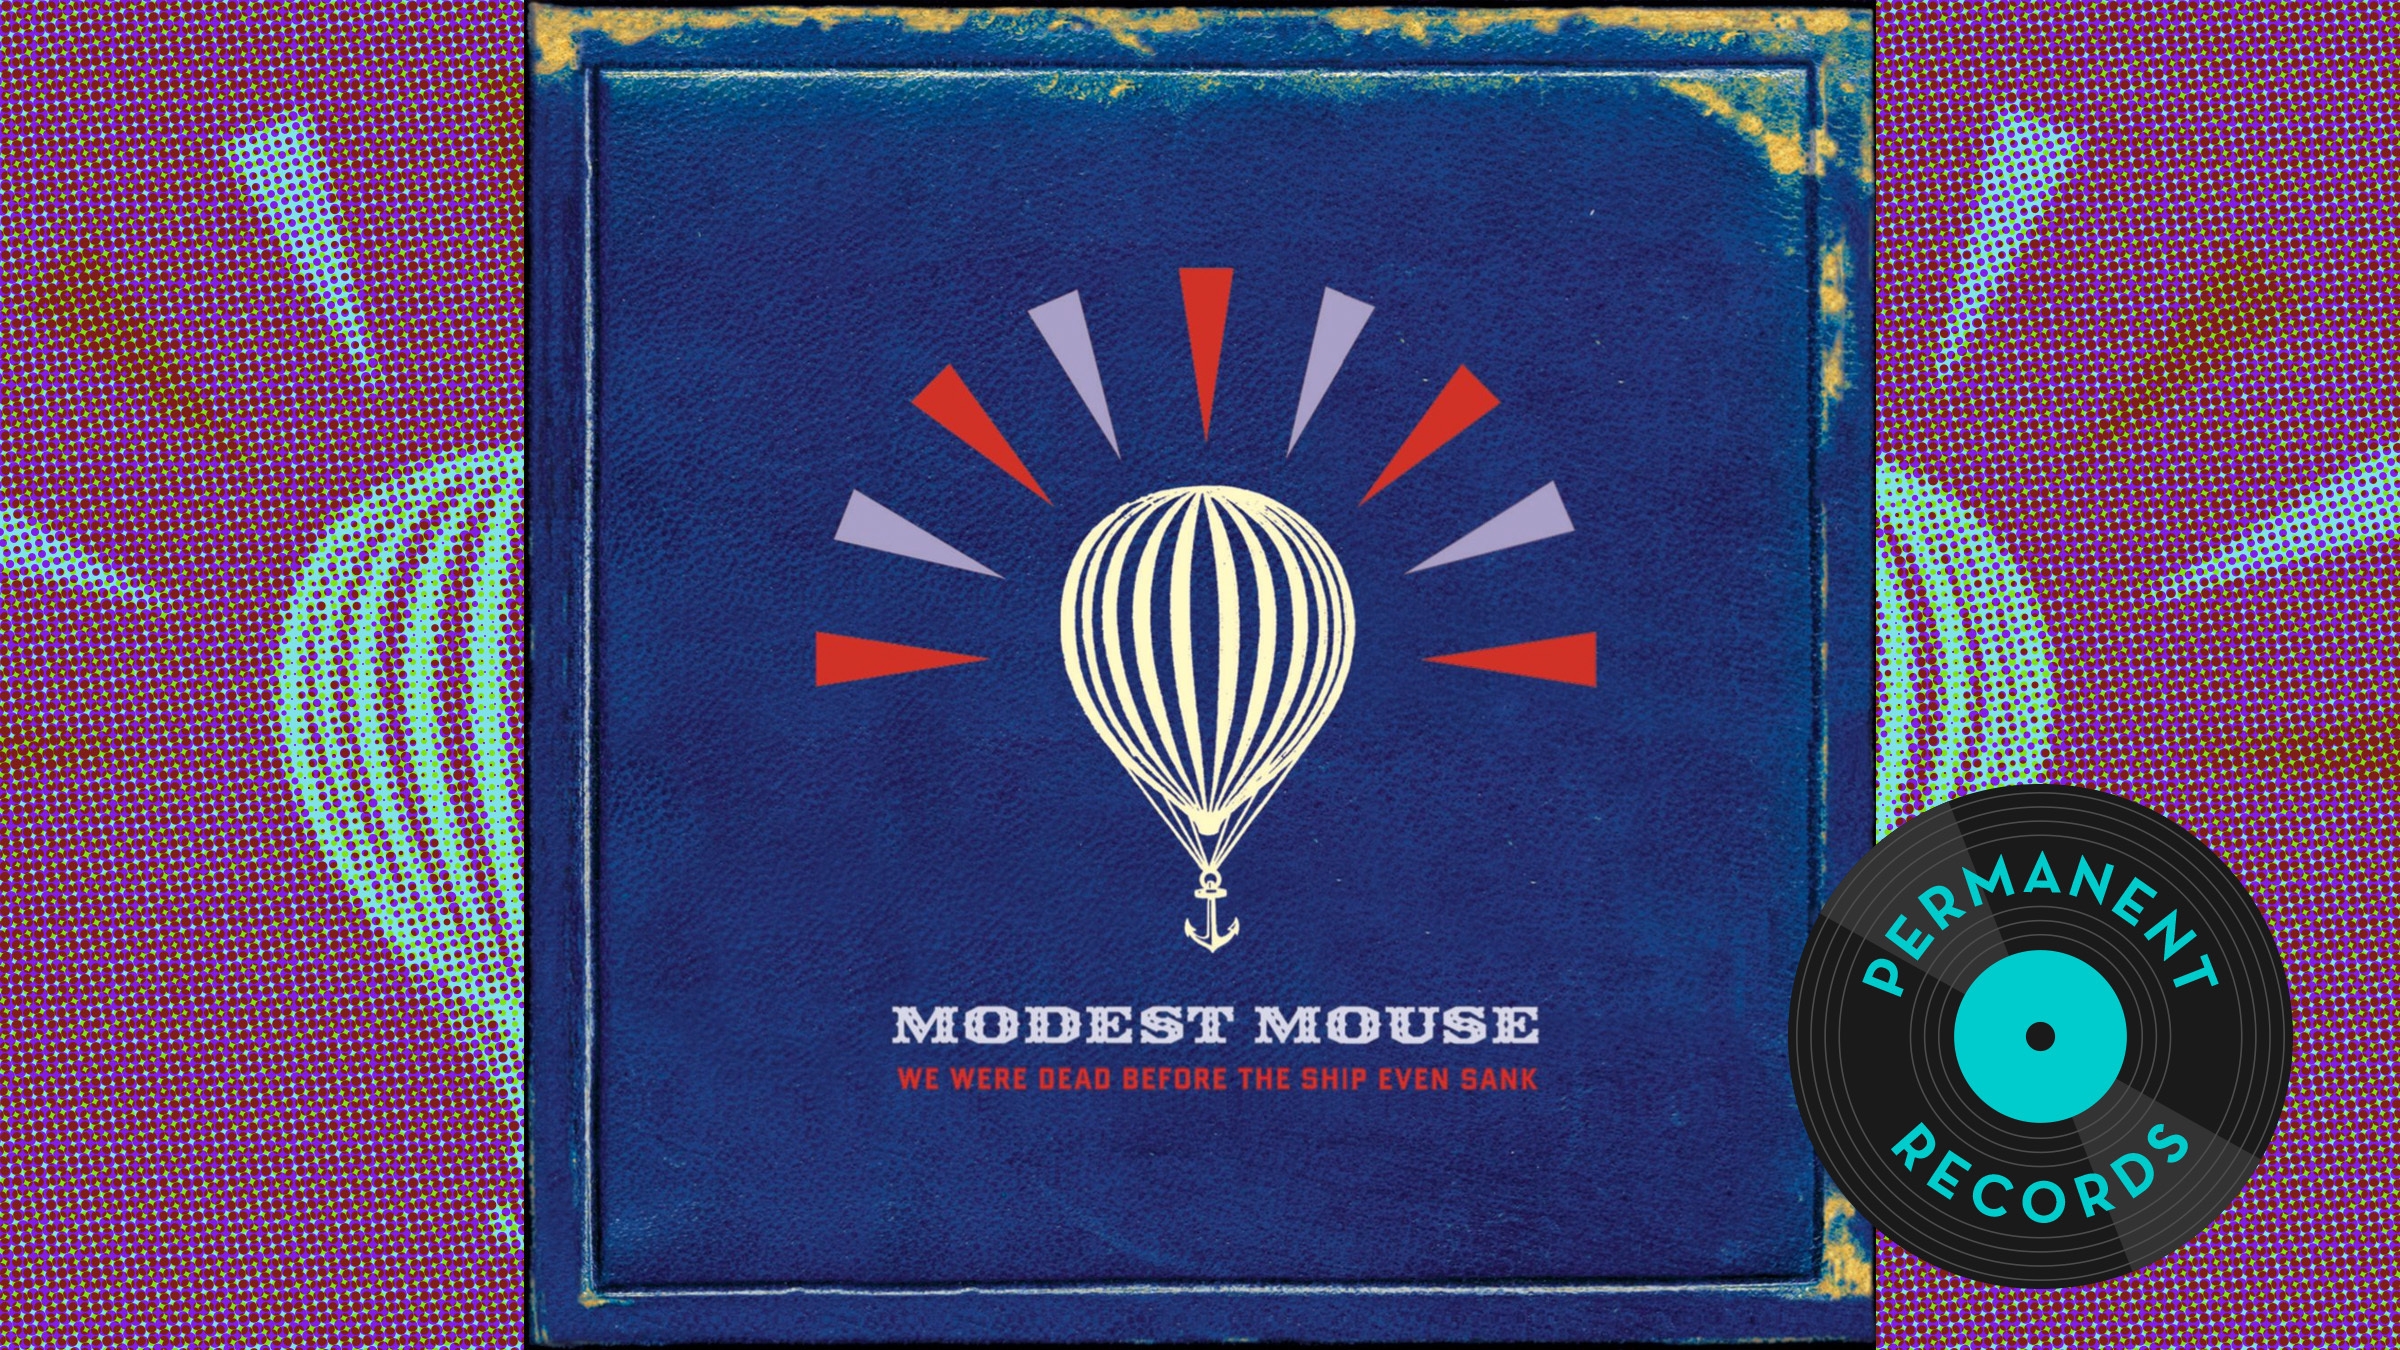 We Were Dead Before The Ship Even Sank remains Modest Mouse’s best post-“Float On” album